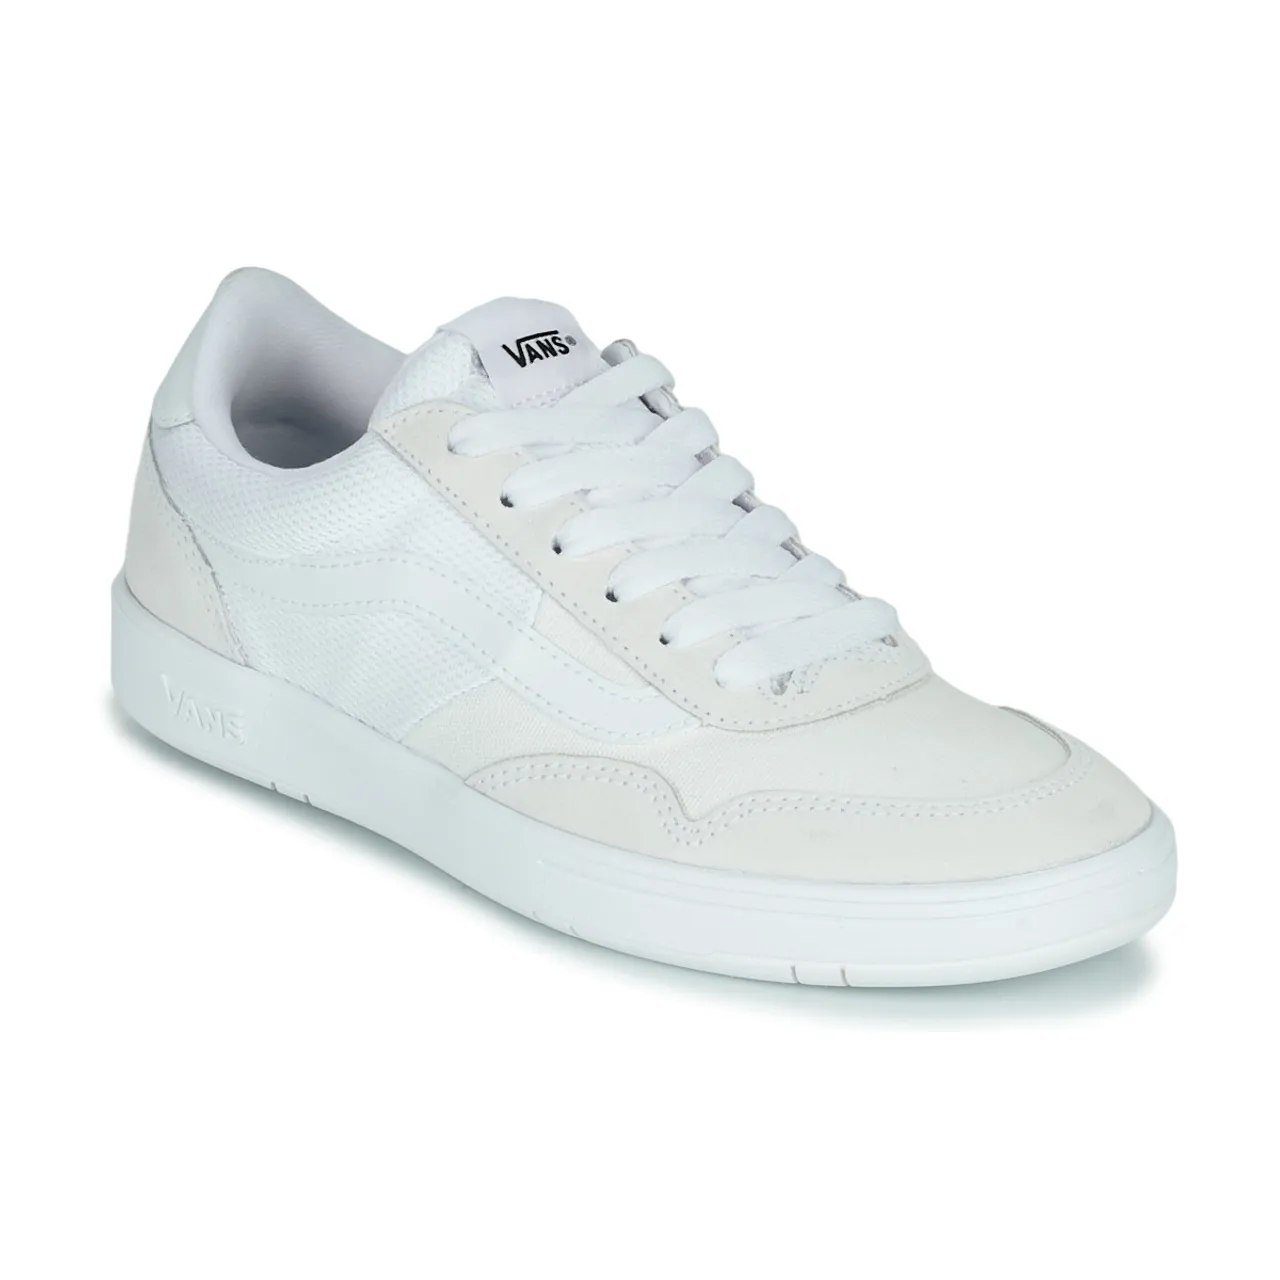 Vans  CRUZE TOO CC  men's Shoes (Trainers) in White